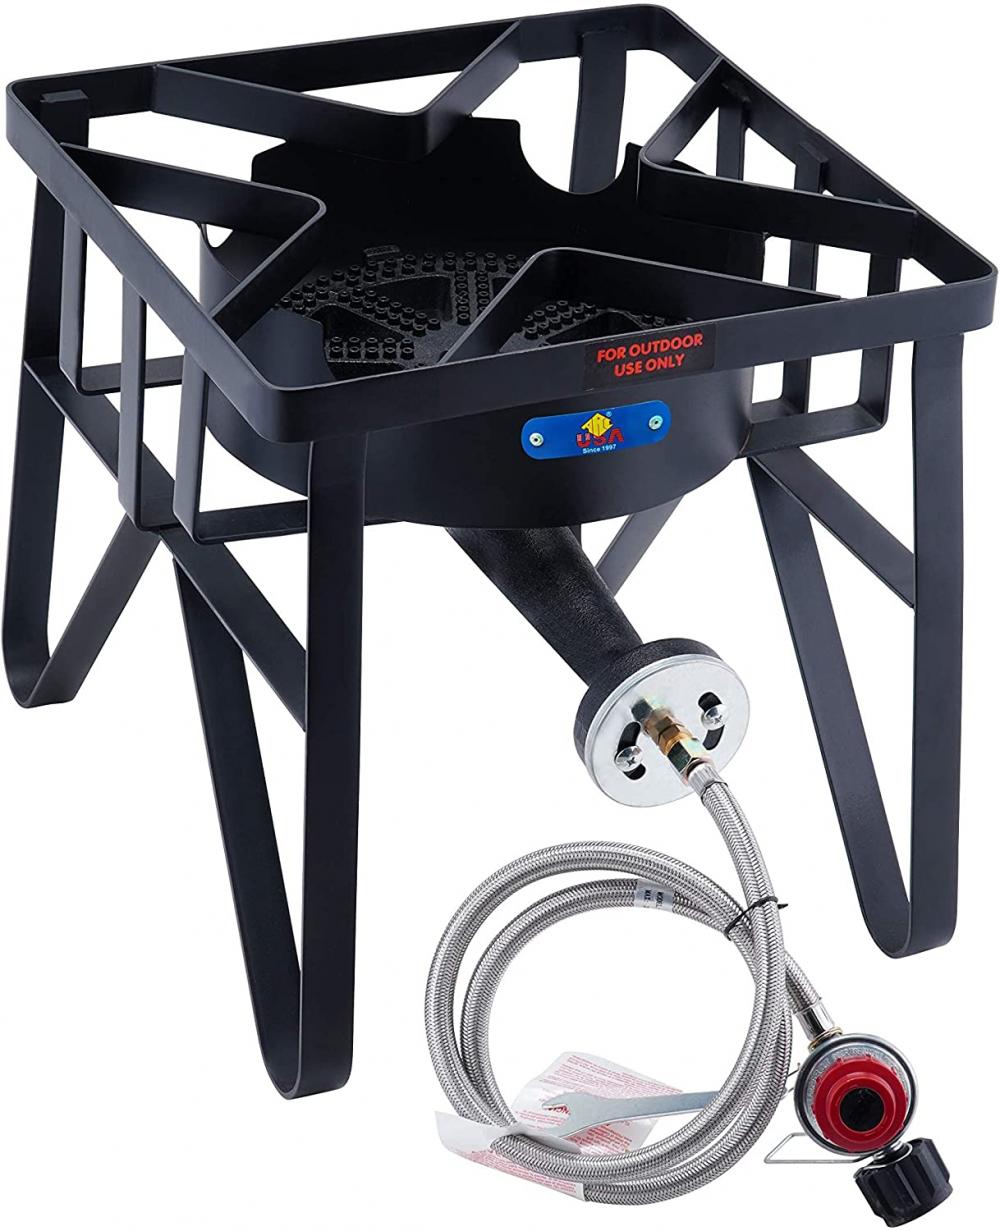 Outdoor Propane Camping Square Burner Stove